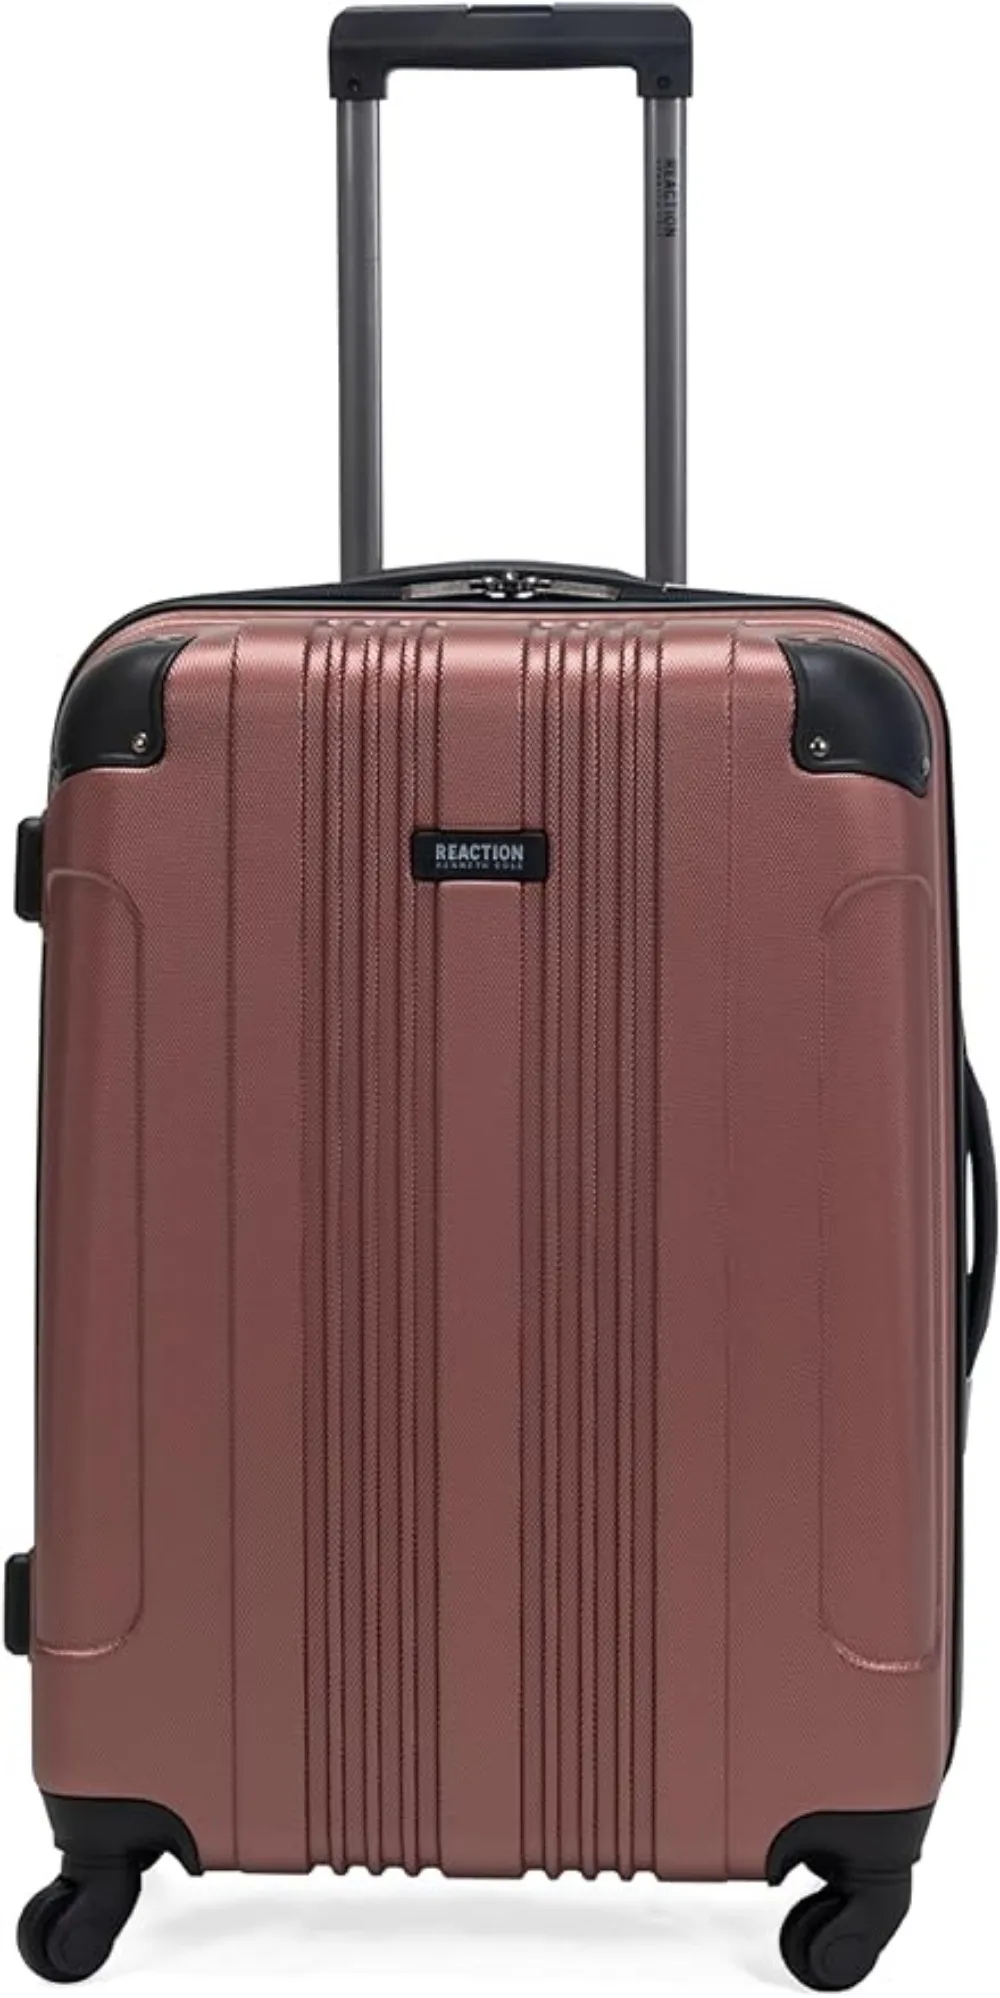 

Kenneth Cole REACTION Out of Bounds Lightweight Hardshell 4-Wheel Spinner Luggage, Rose Gold, 24-Inch Checked